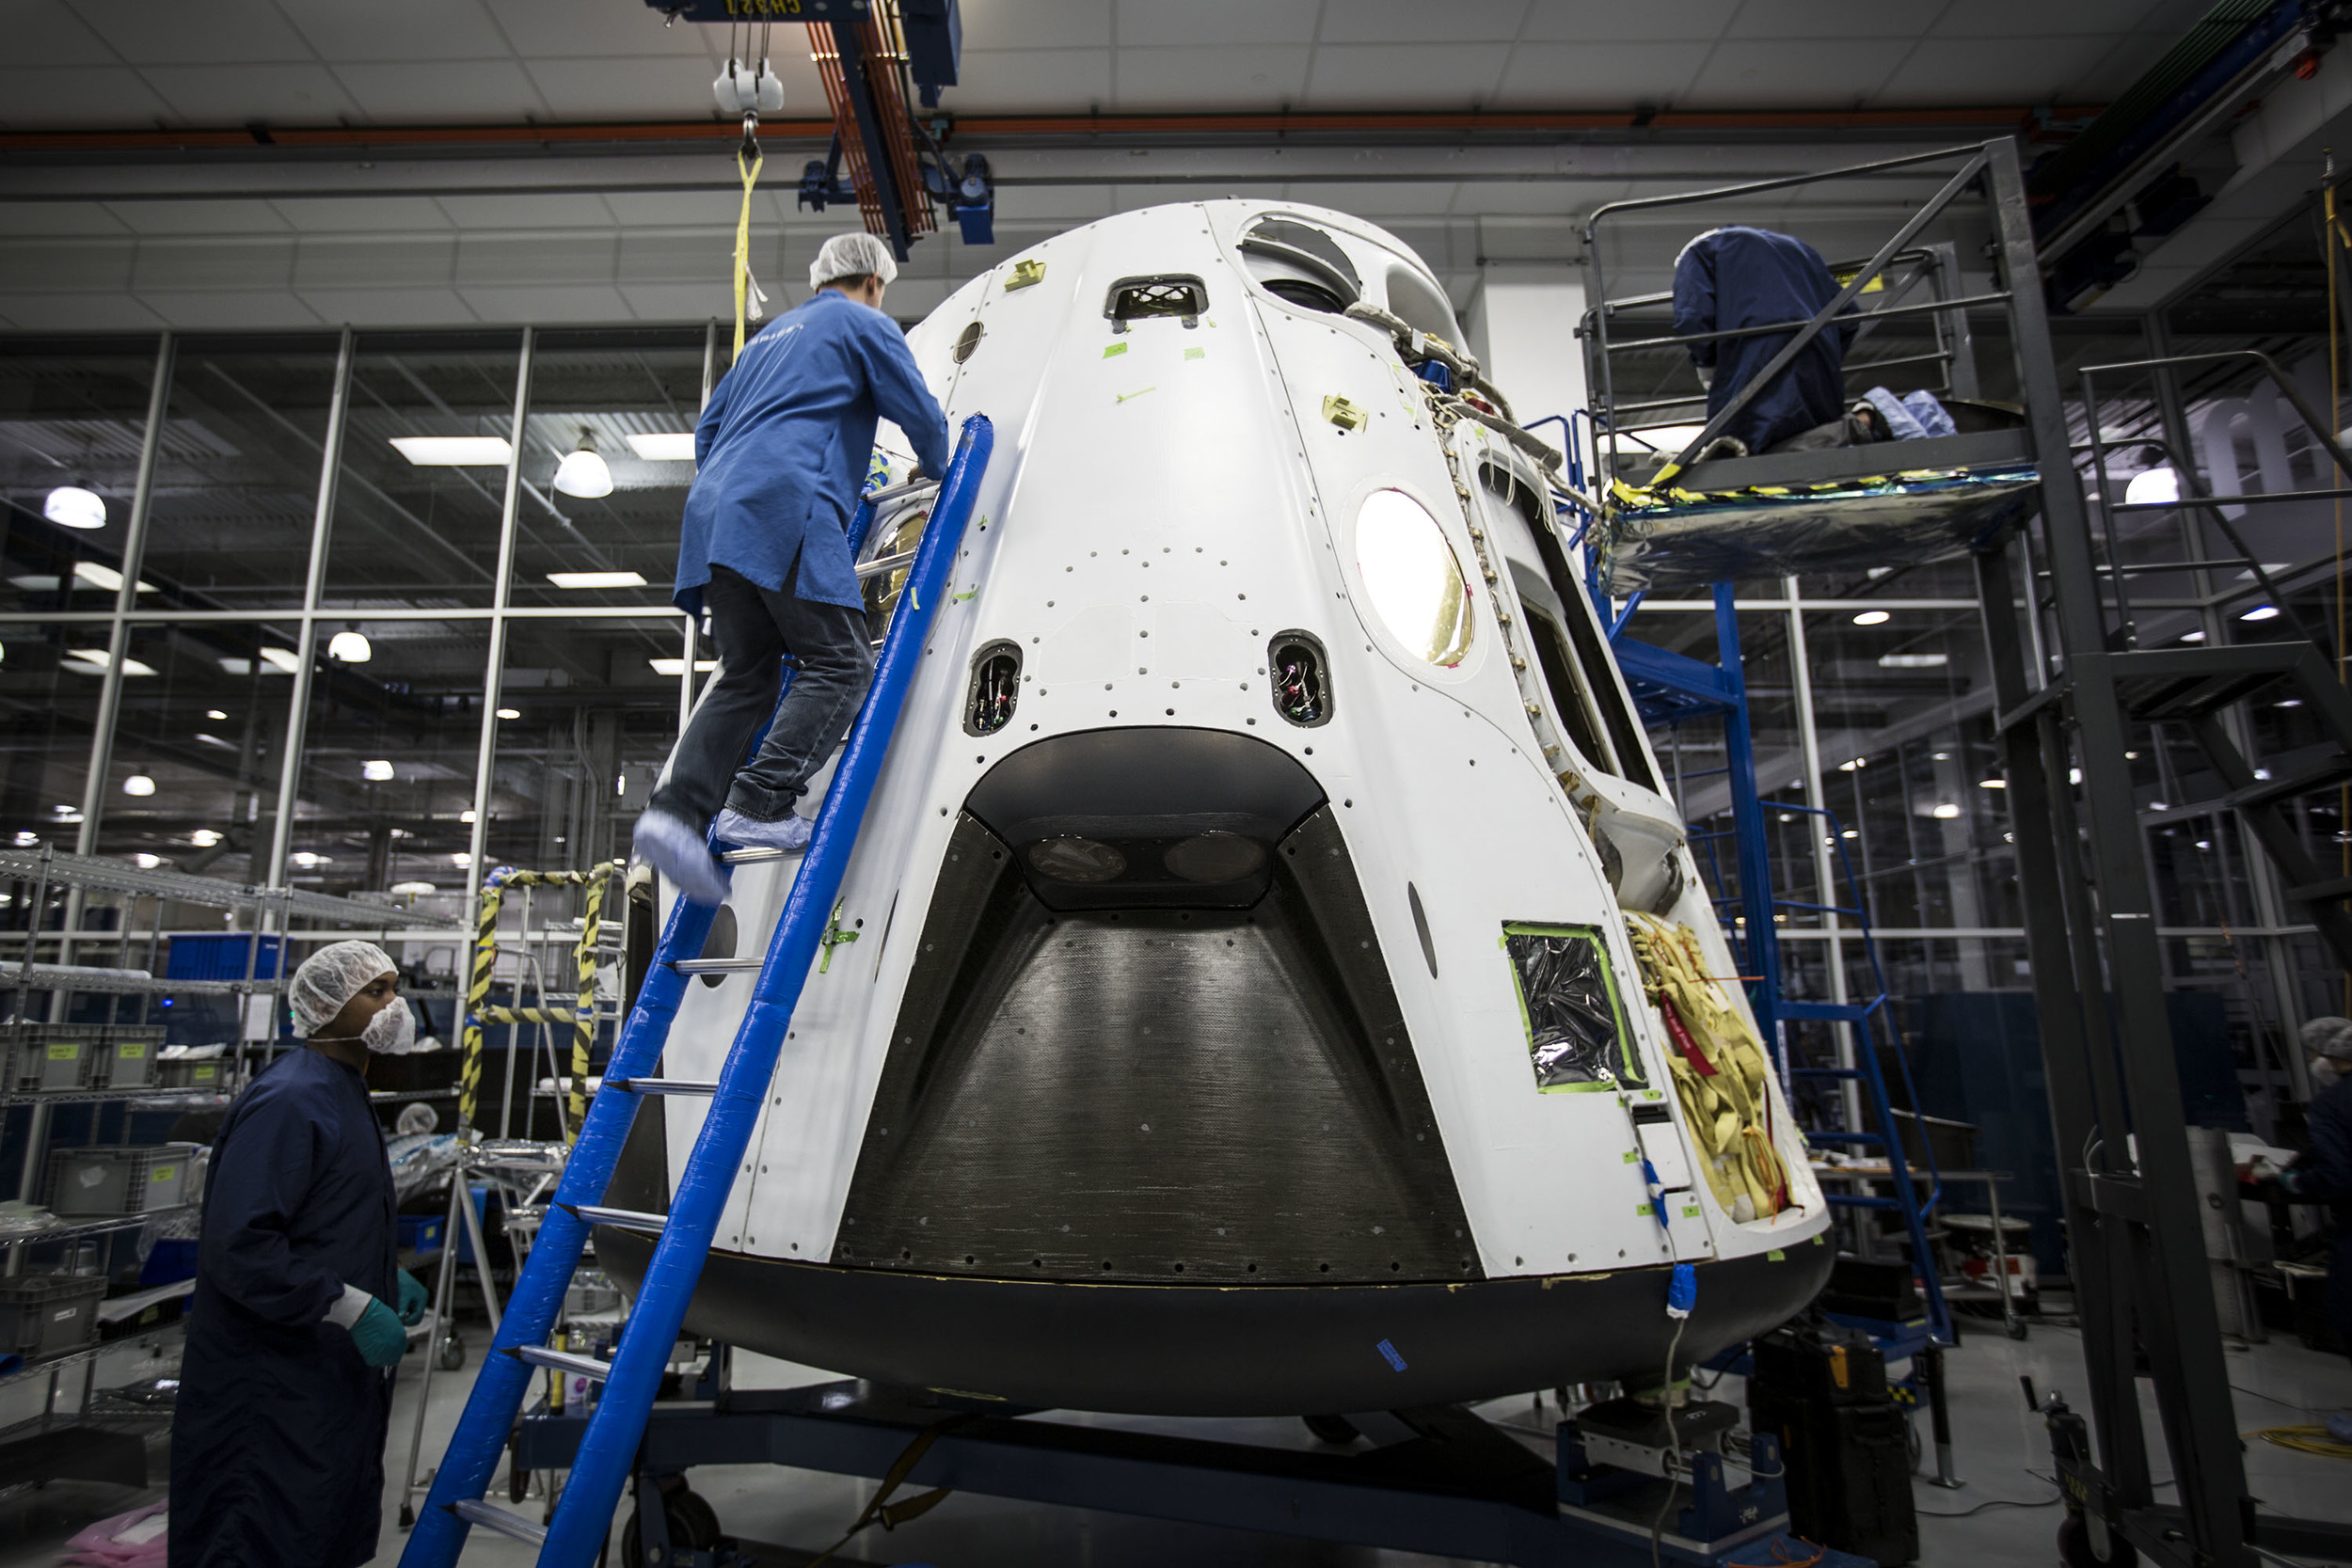  Engineers prepare a Crew Dragon for the Pad Abort test in 2015. Photo Credit: SpaceX 